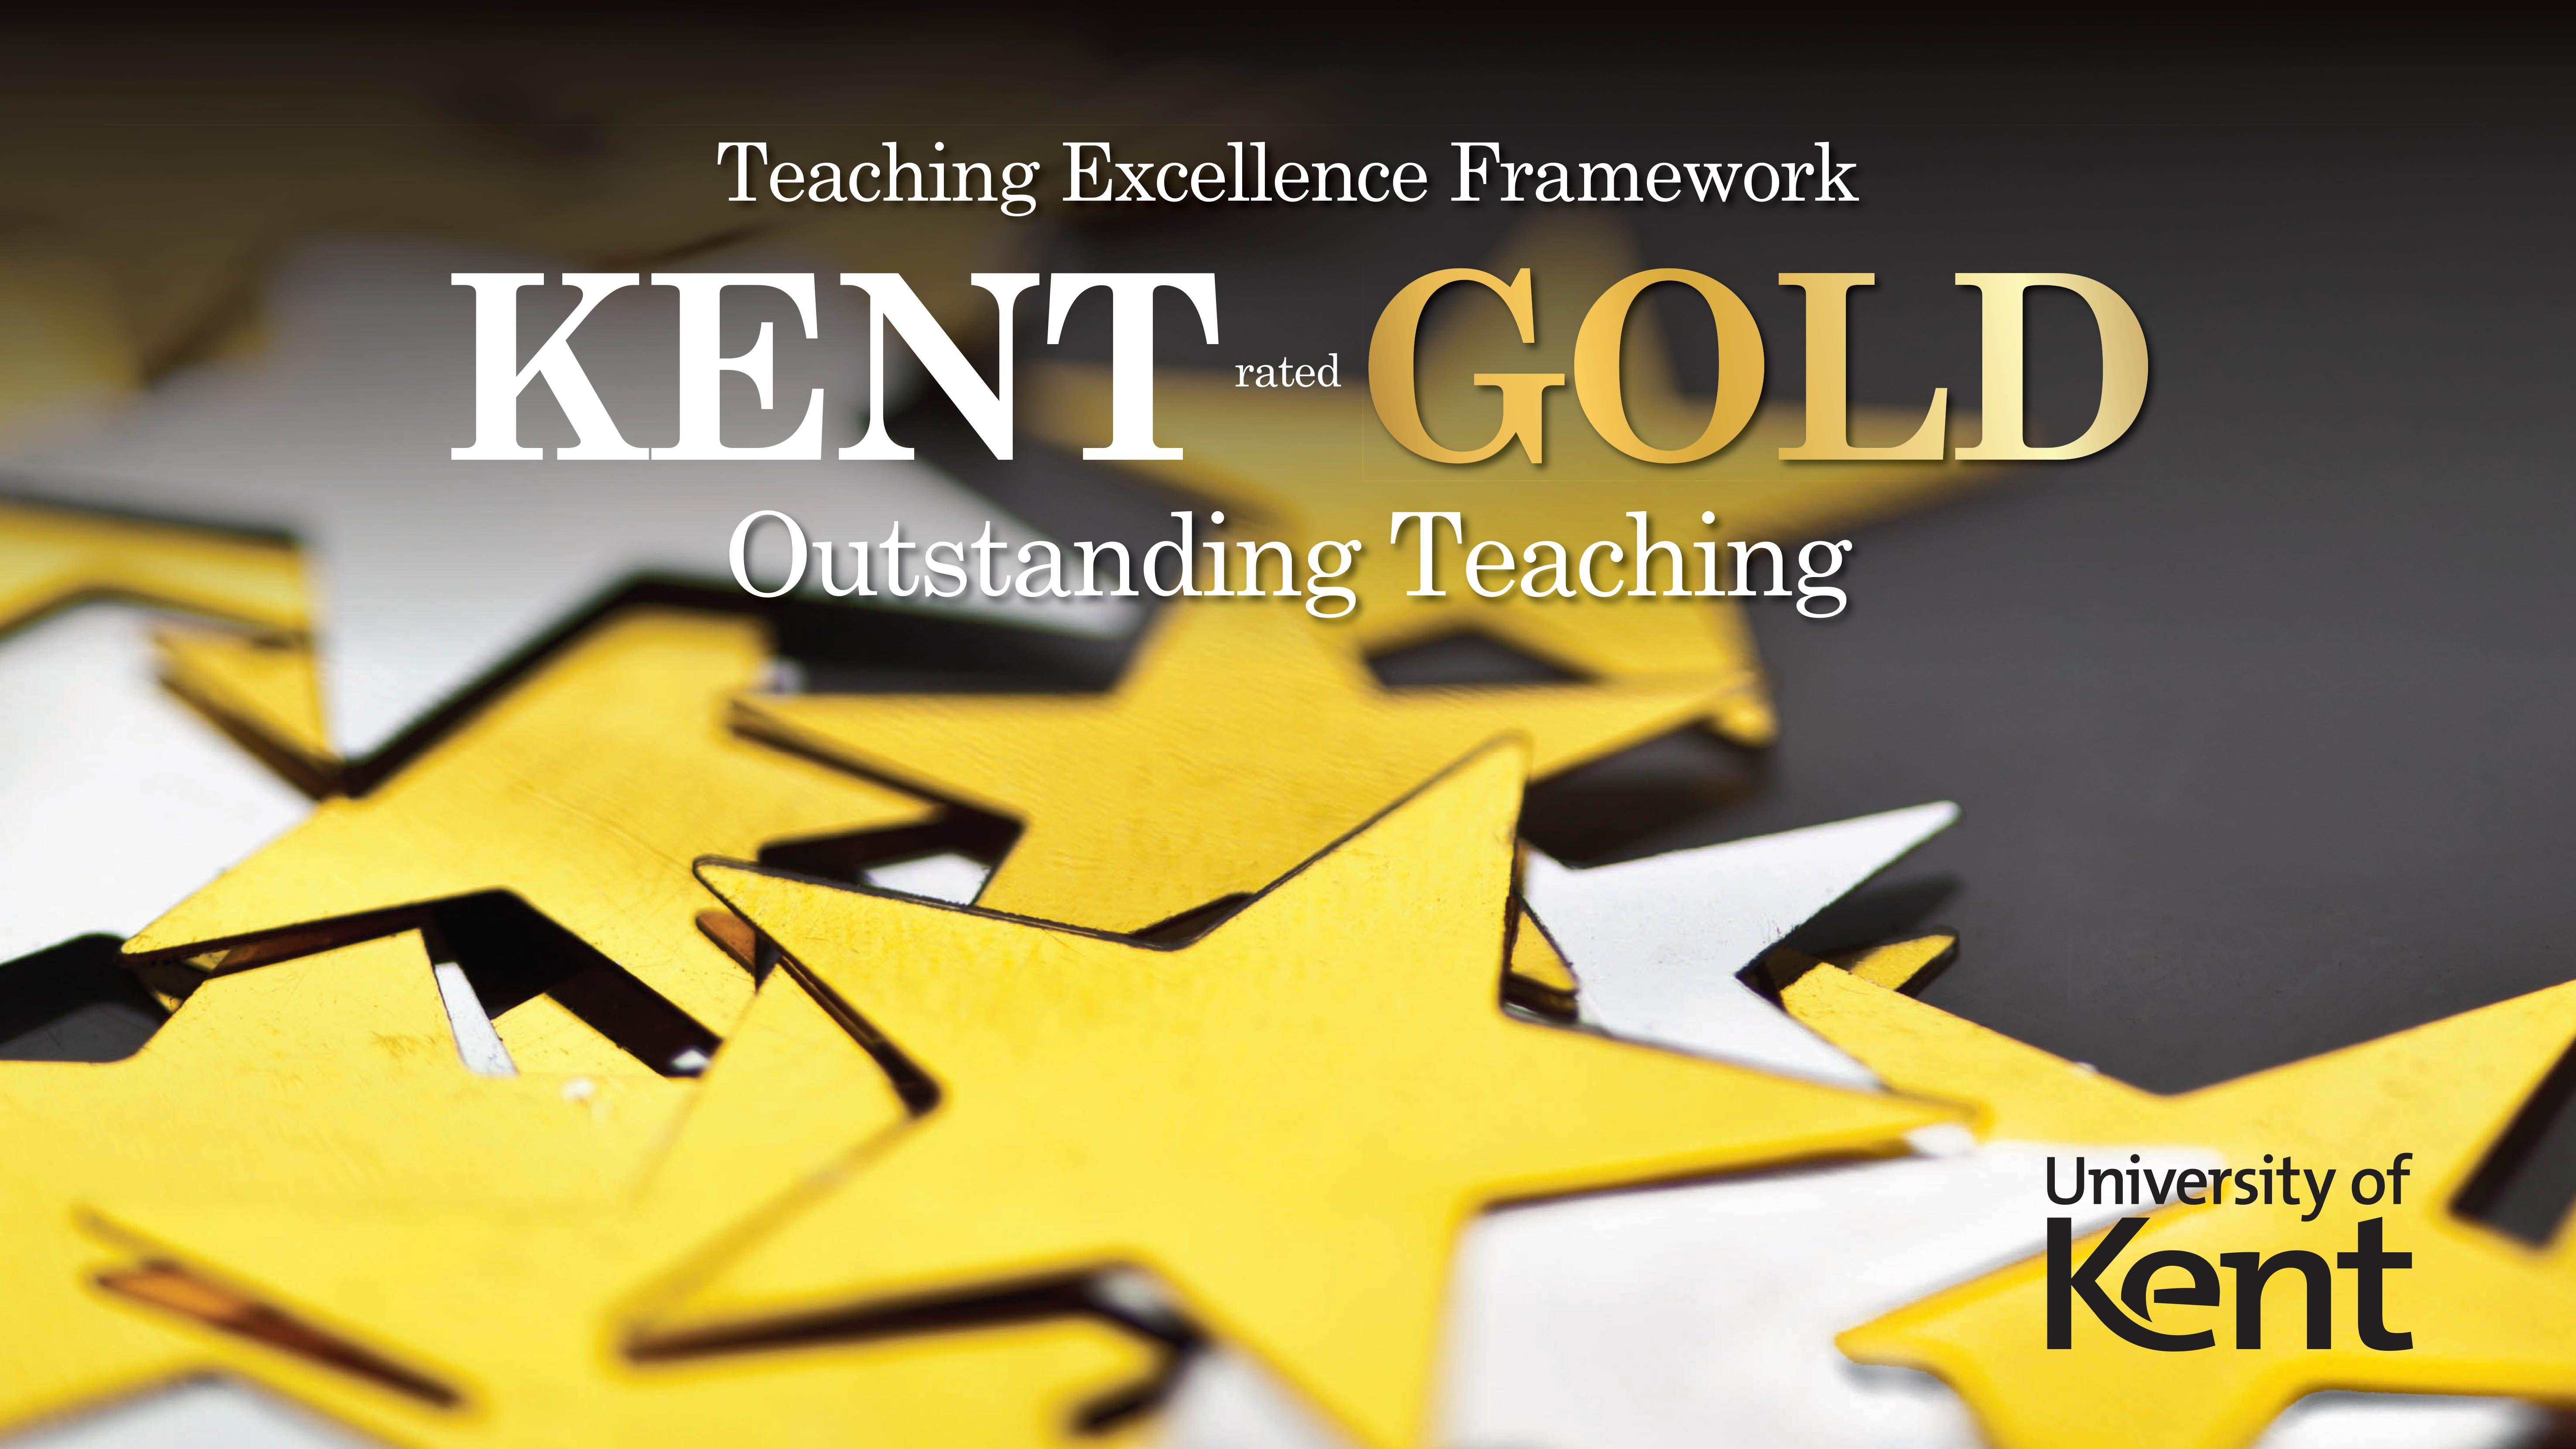 Gold-Rated Logo - TEF guidance and materials - University of Kent